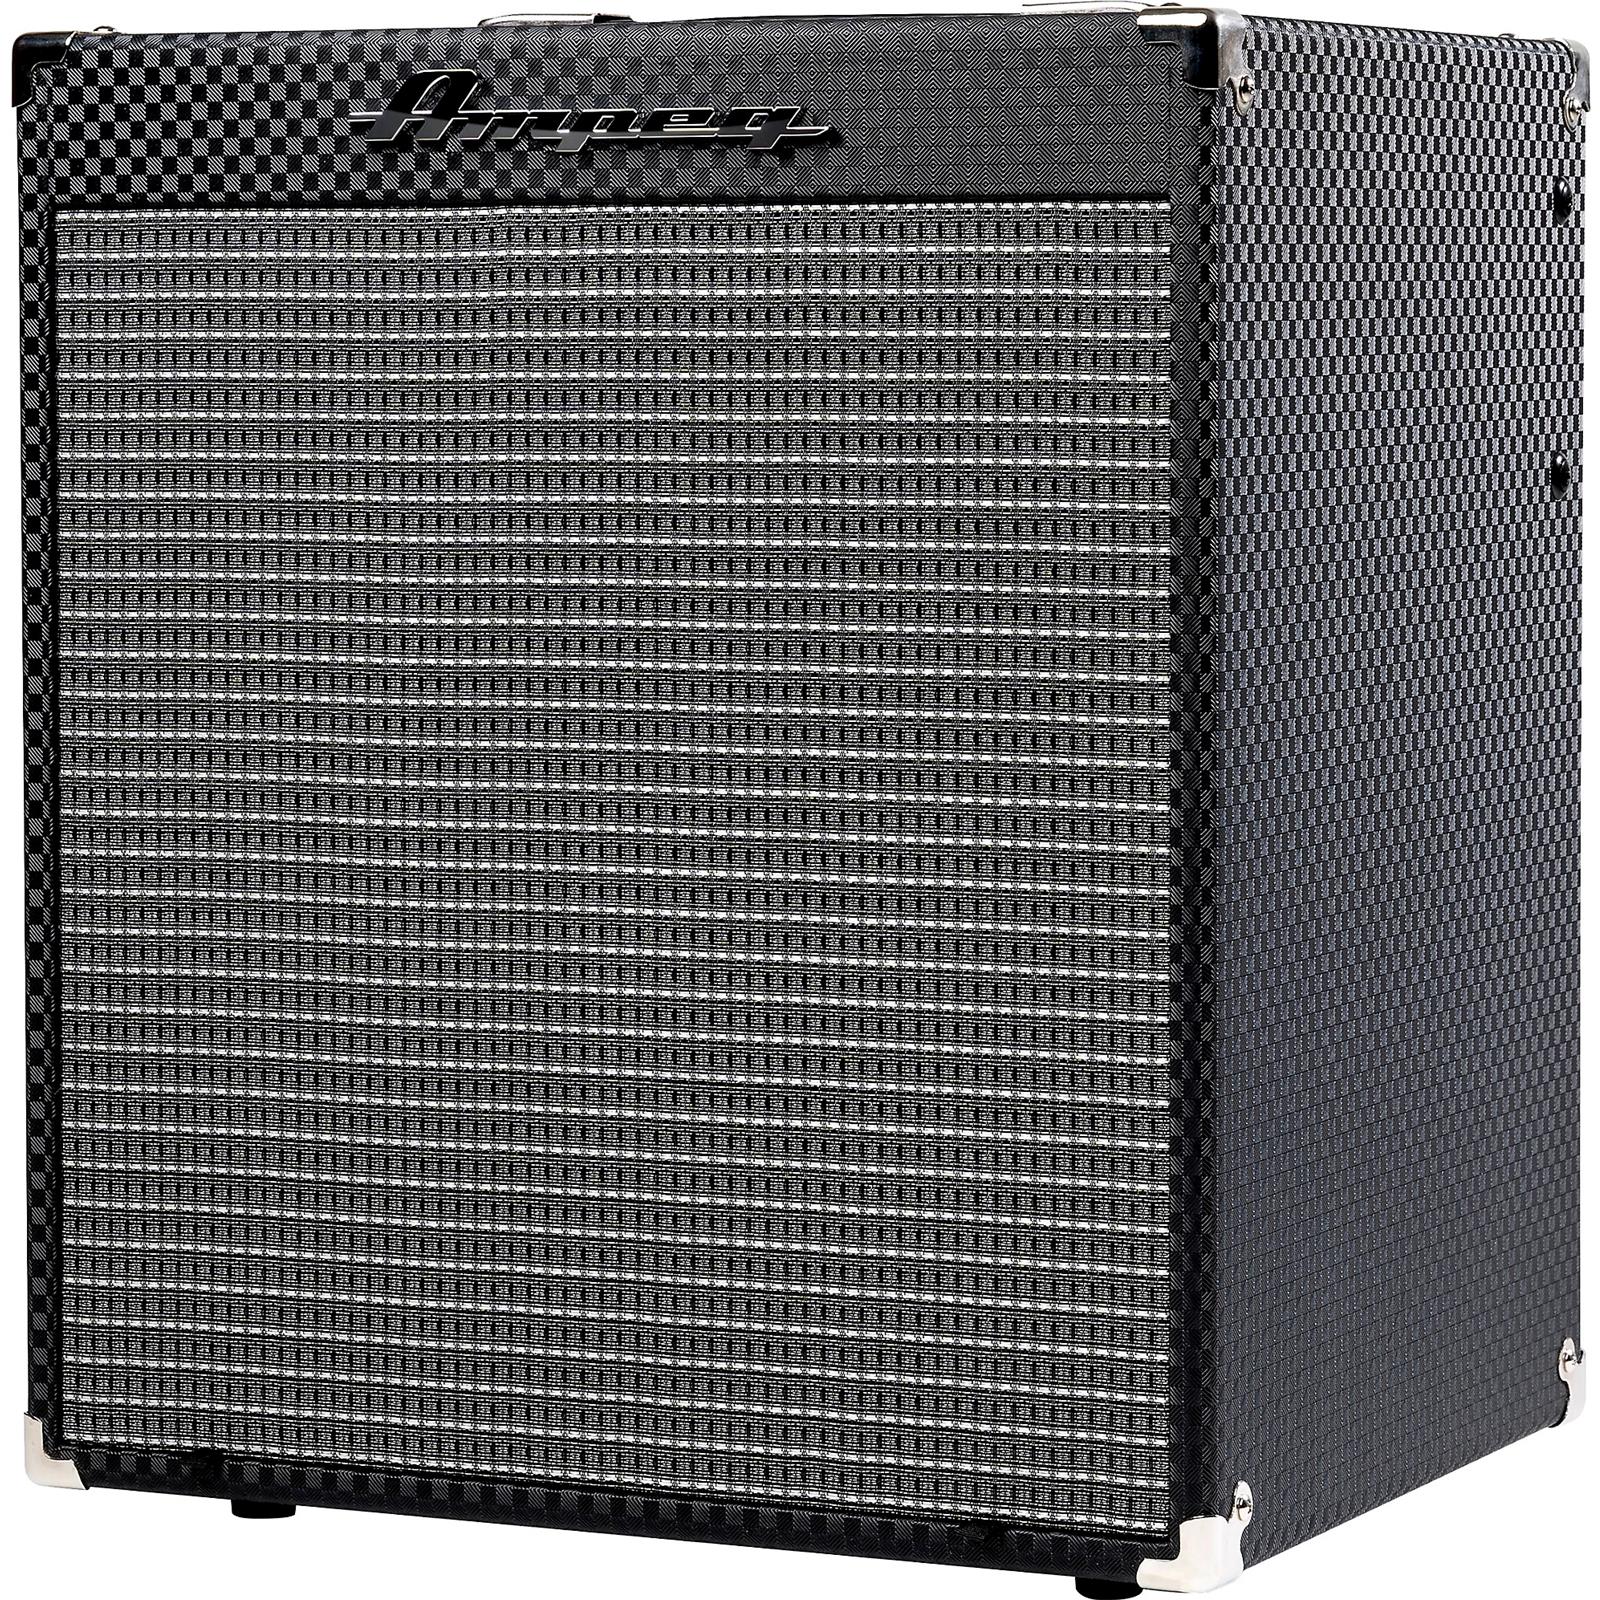 AMPEG Rocket Bass RB-110 1x10 50W Bass Combo Amp Black and Silver